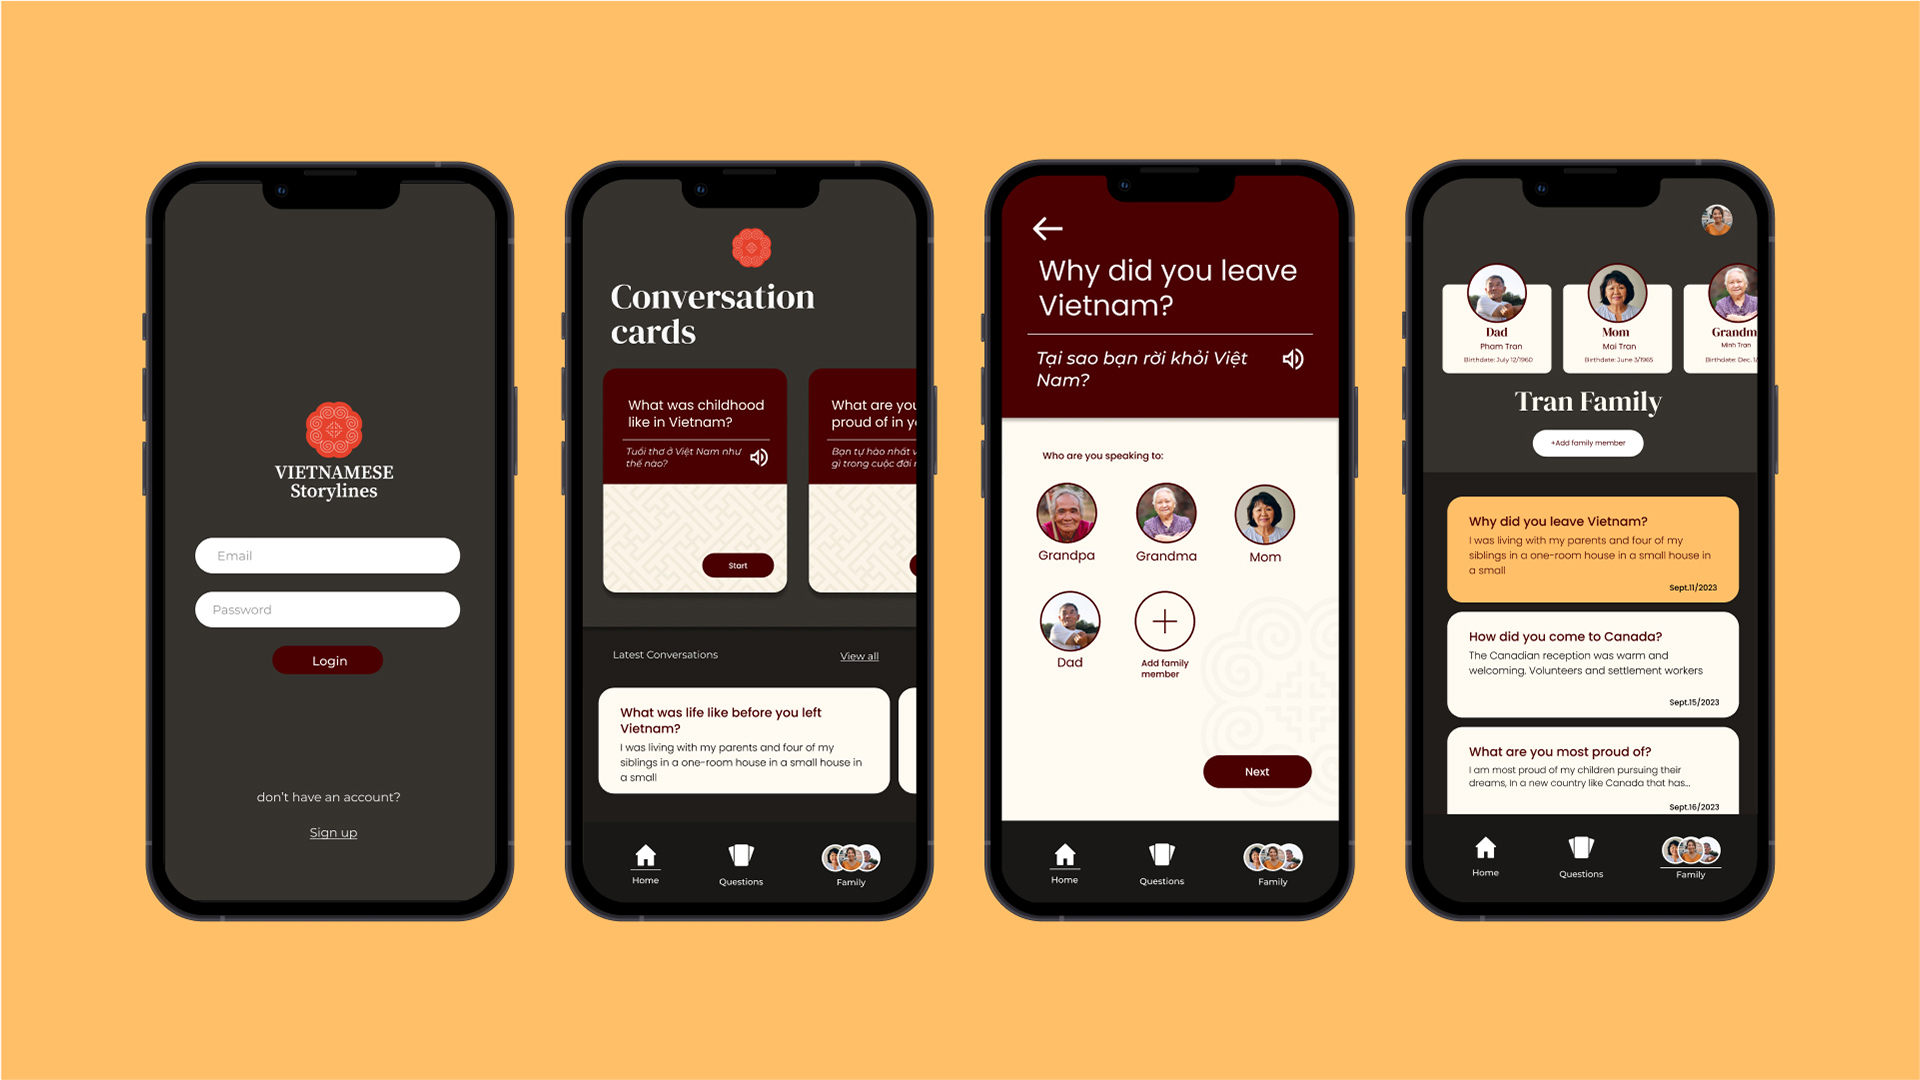 4 iPhone screens for Vietnamese Storylines app that include a login page, homepage, and a profile page.